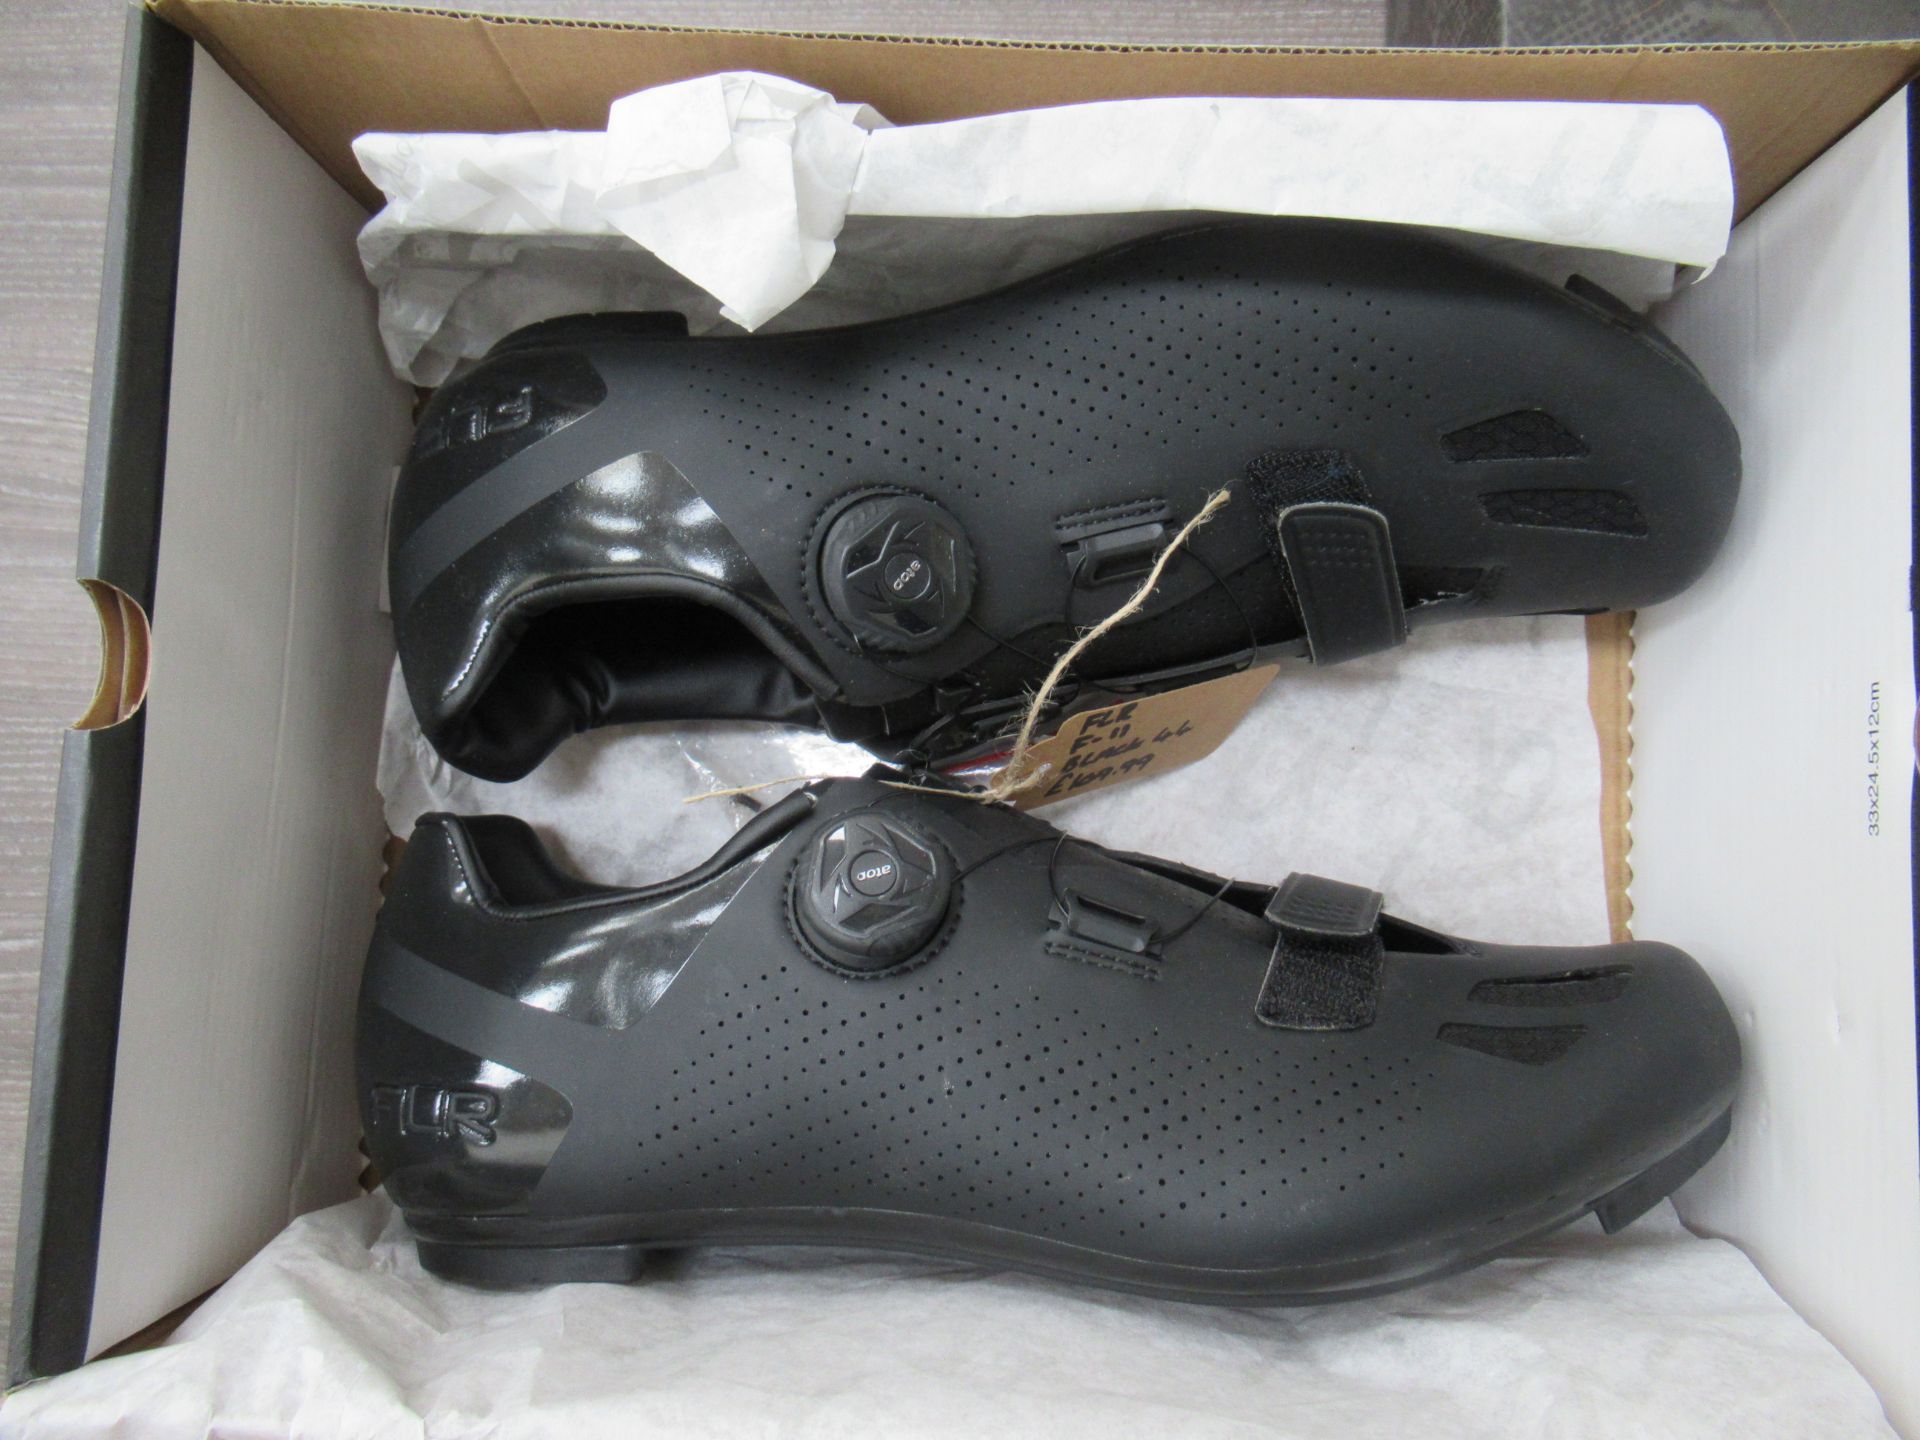 3 x Pairs of FLR cycling shoes - 1 x Bushmaster boxed EU size 41 (RRP£79.99); 1 x F-11 boxed EU size - Image 6 of 10